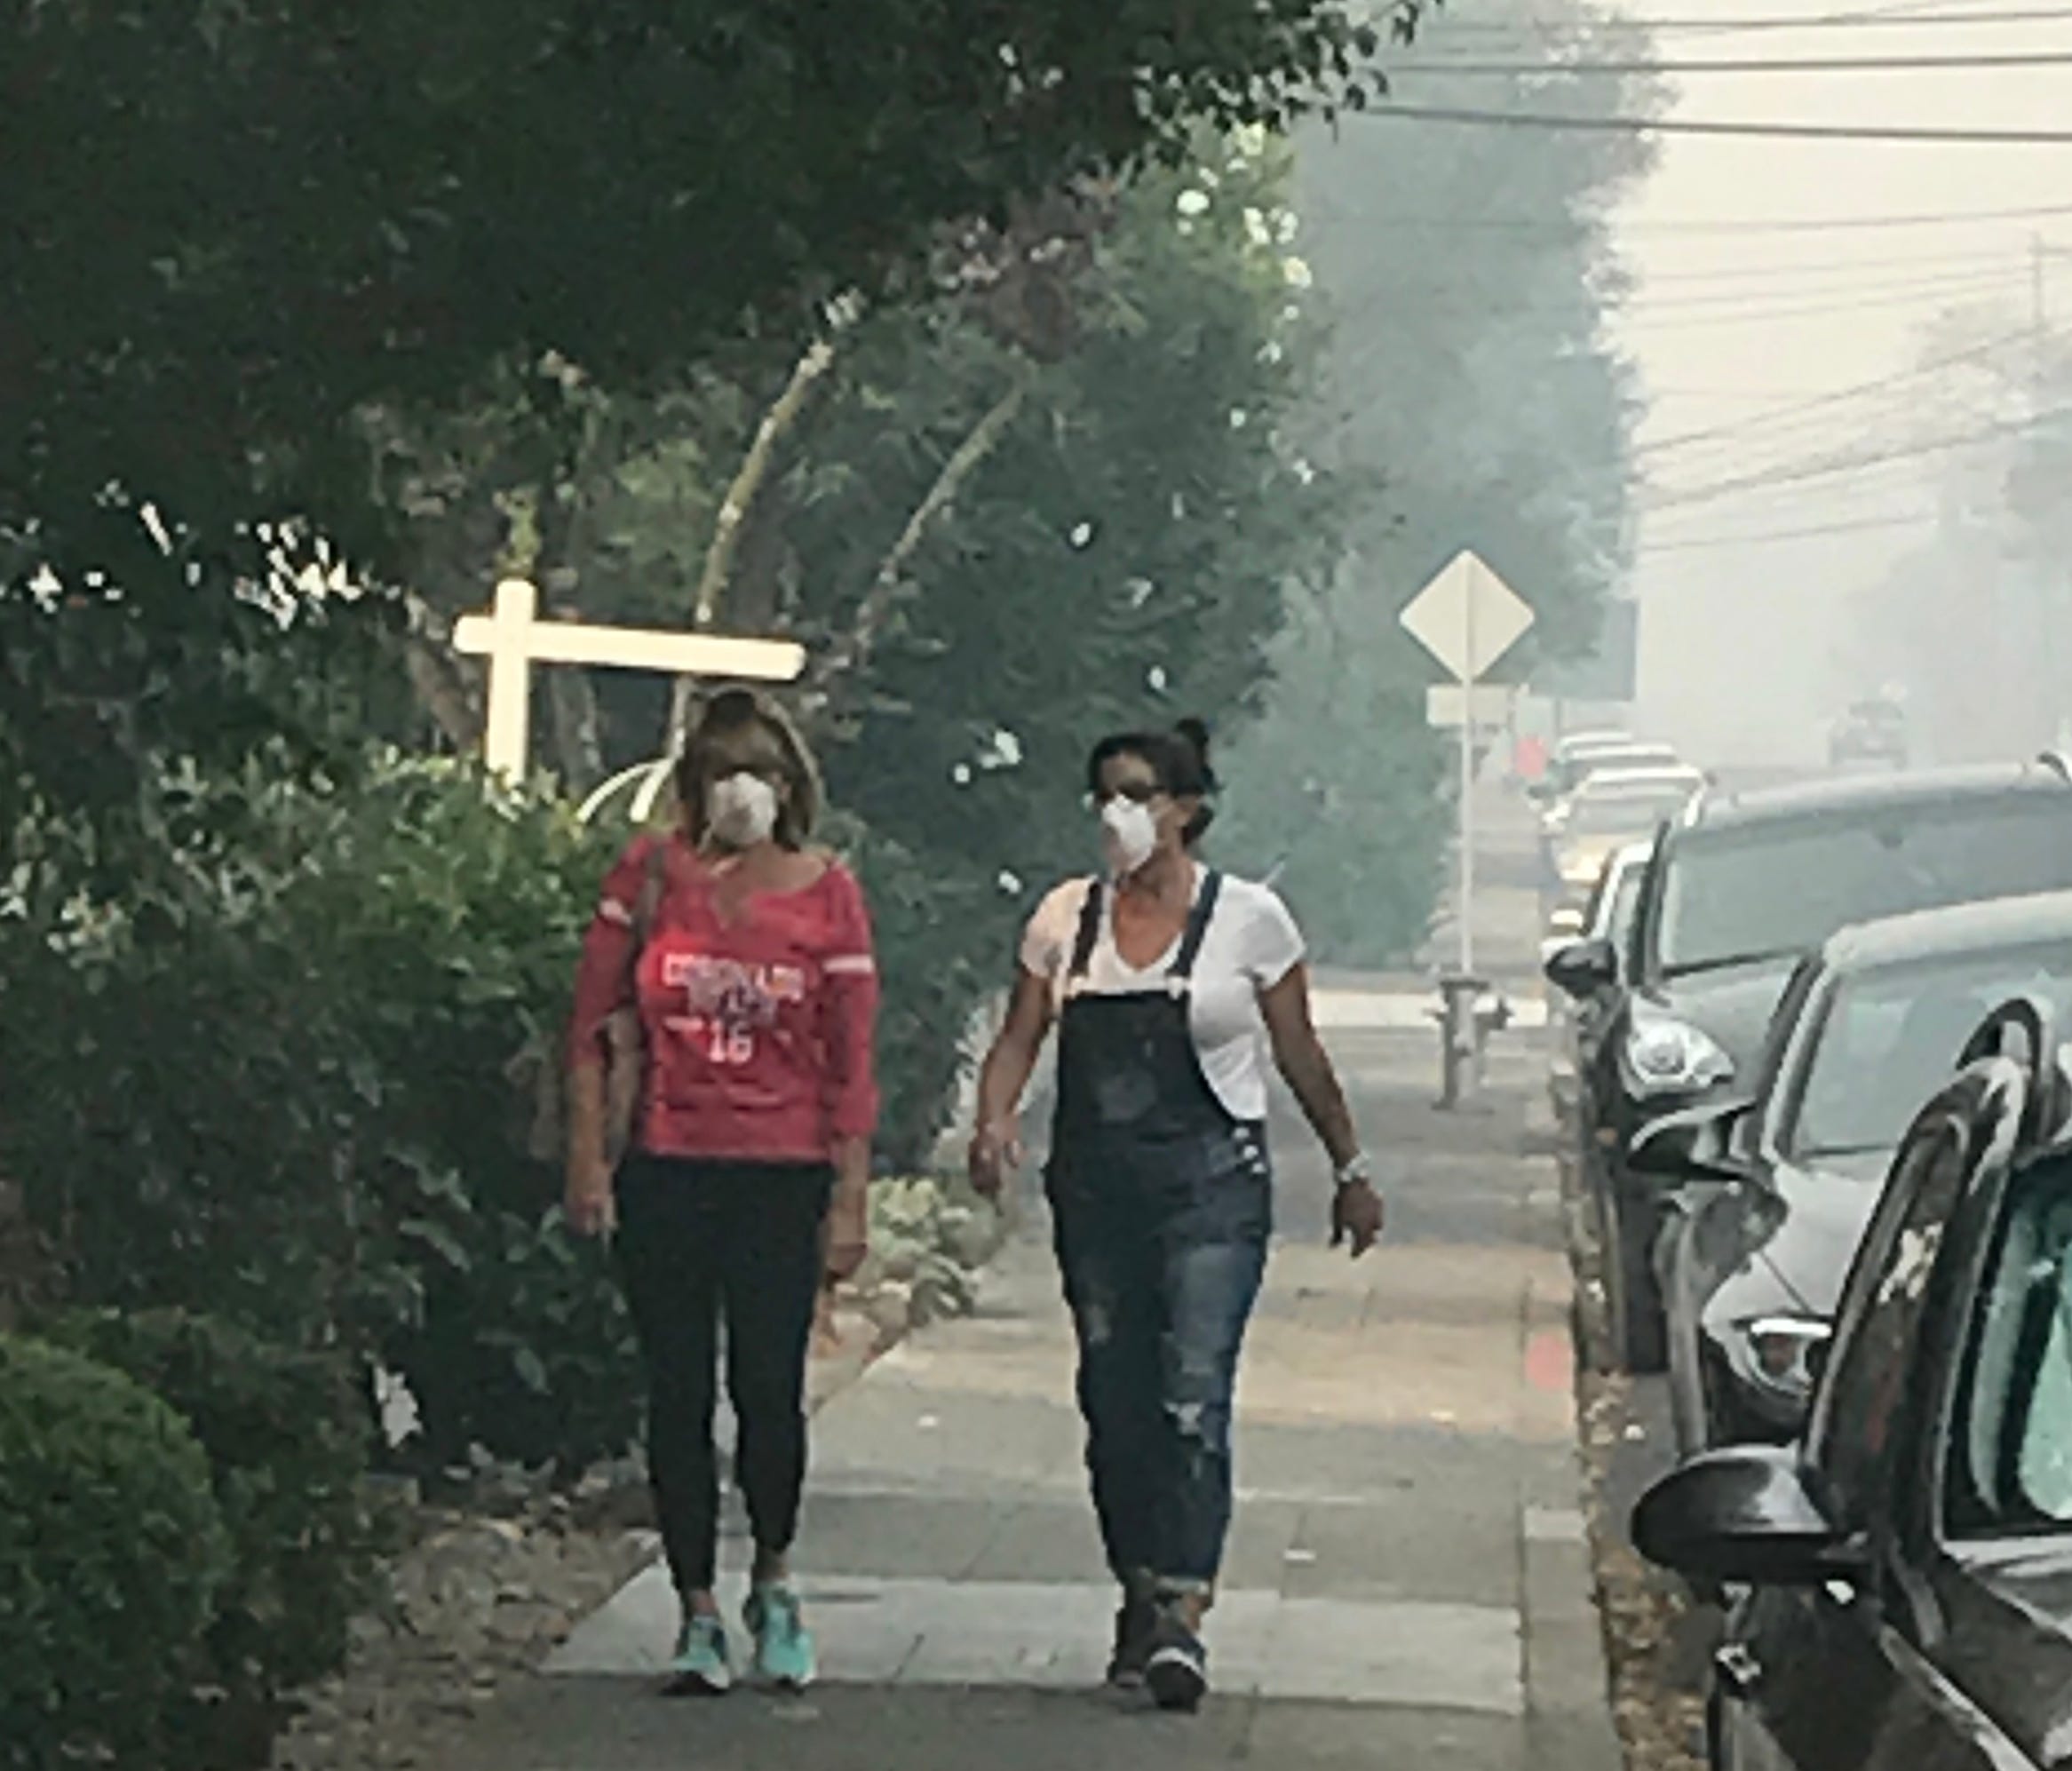 Women walking in Sonoma, Calif. wearing face masks to keep out the smoke and particulate matter in the air due to the wildfires in the area.